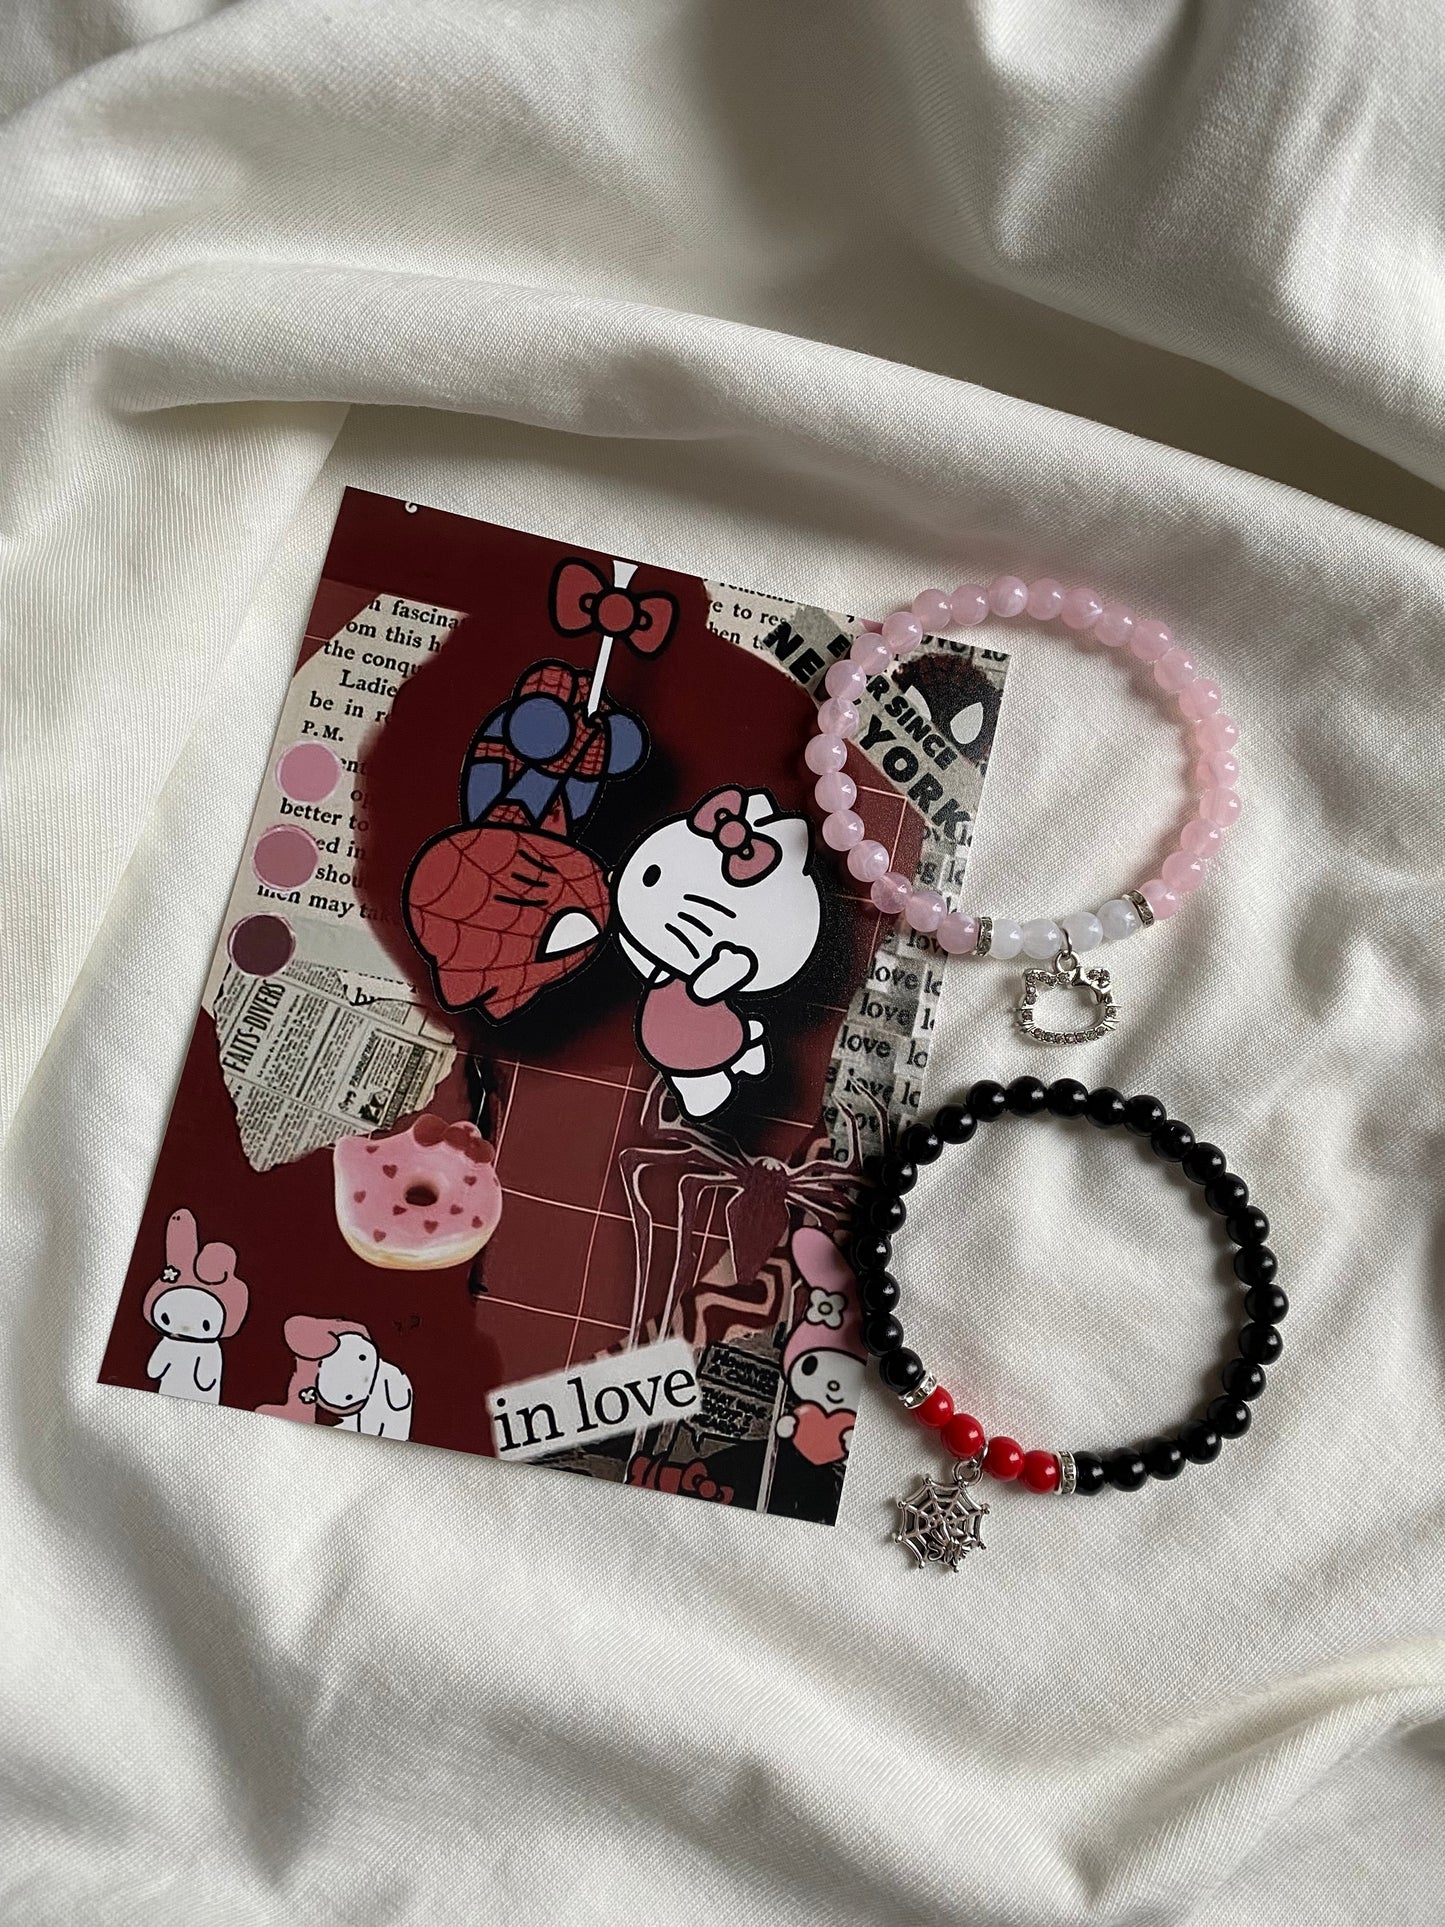 Spiderman and Hello Kitty matching bracelets